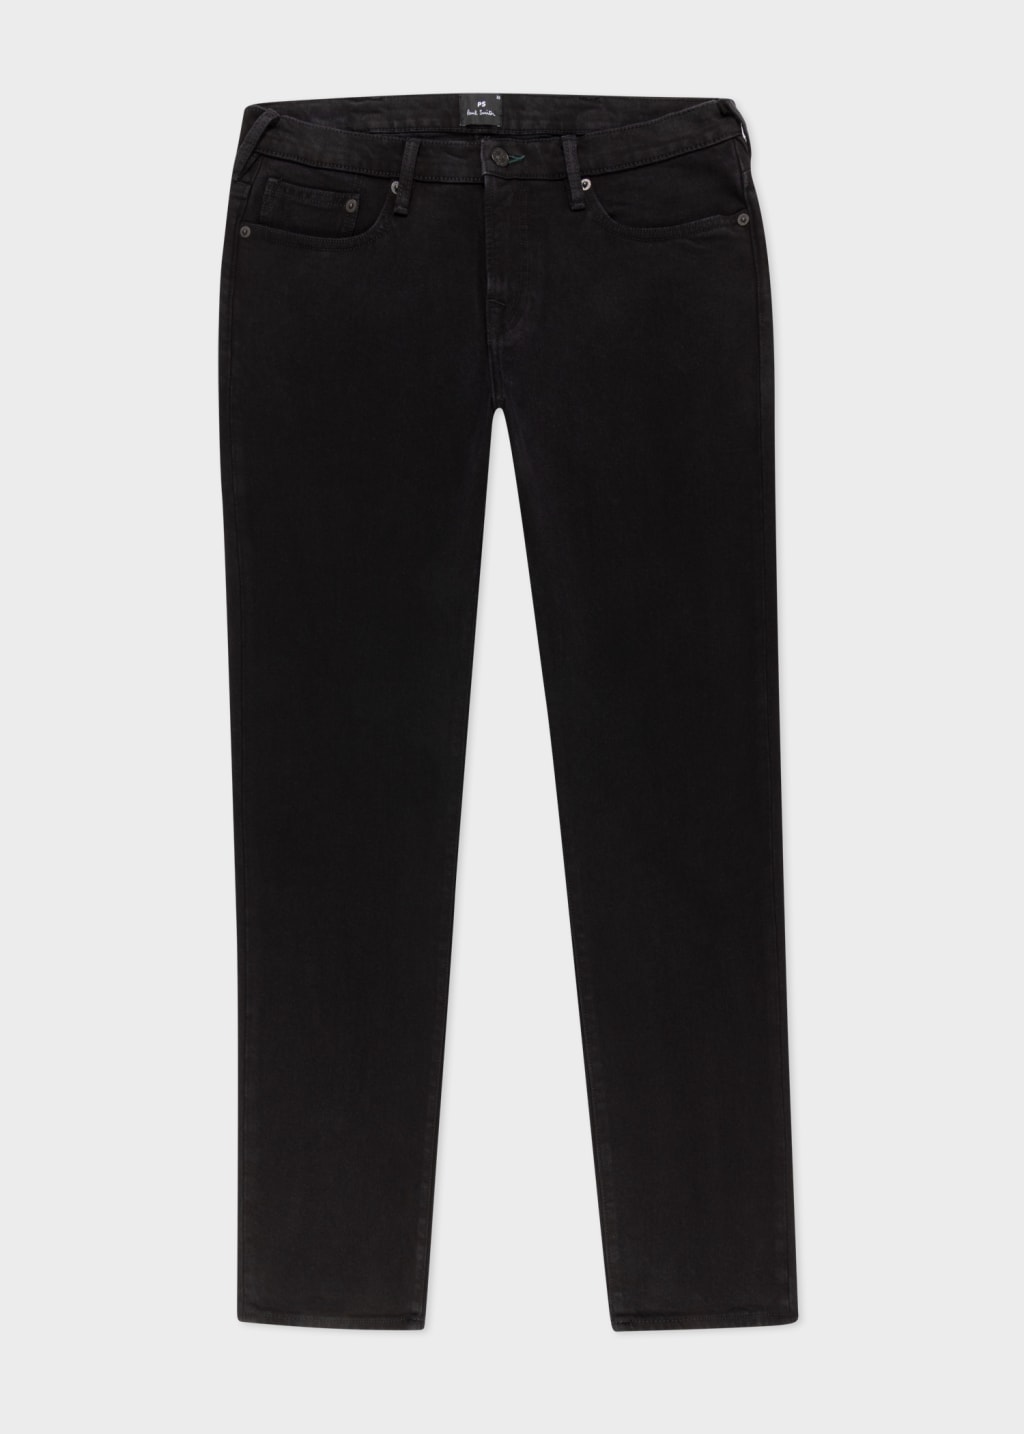 Front View - Tapered-Fit Black Organic Stretch Jeans Paul Smith